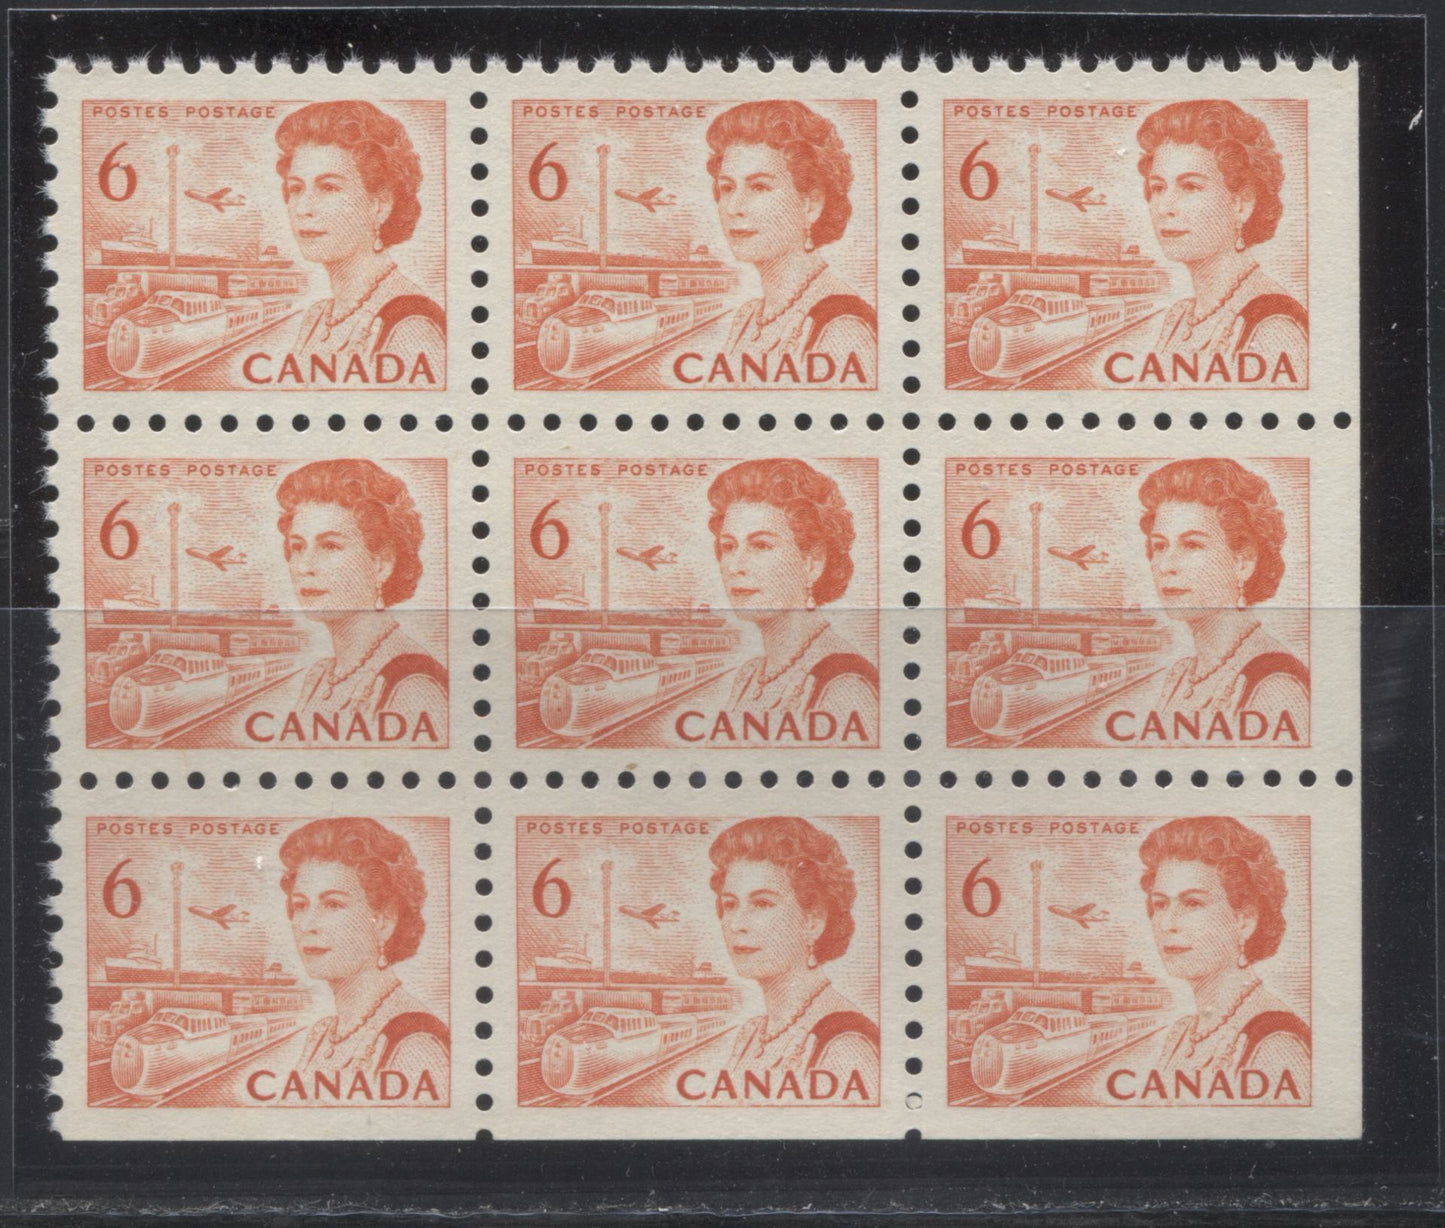 Canada #459ii 6c Orange Transportation, 1967-1973 Centennial Definitive Issue, A VFNH Positional LR Block of 9 With Fluorescent Ink, Showing the Extra Train Light